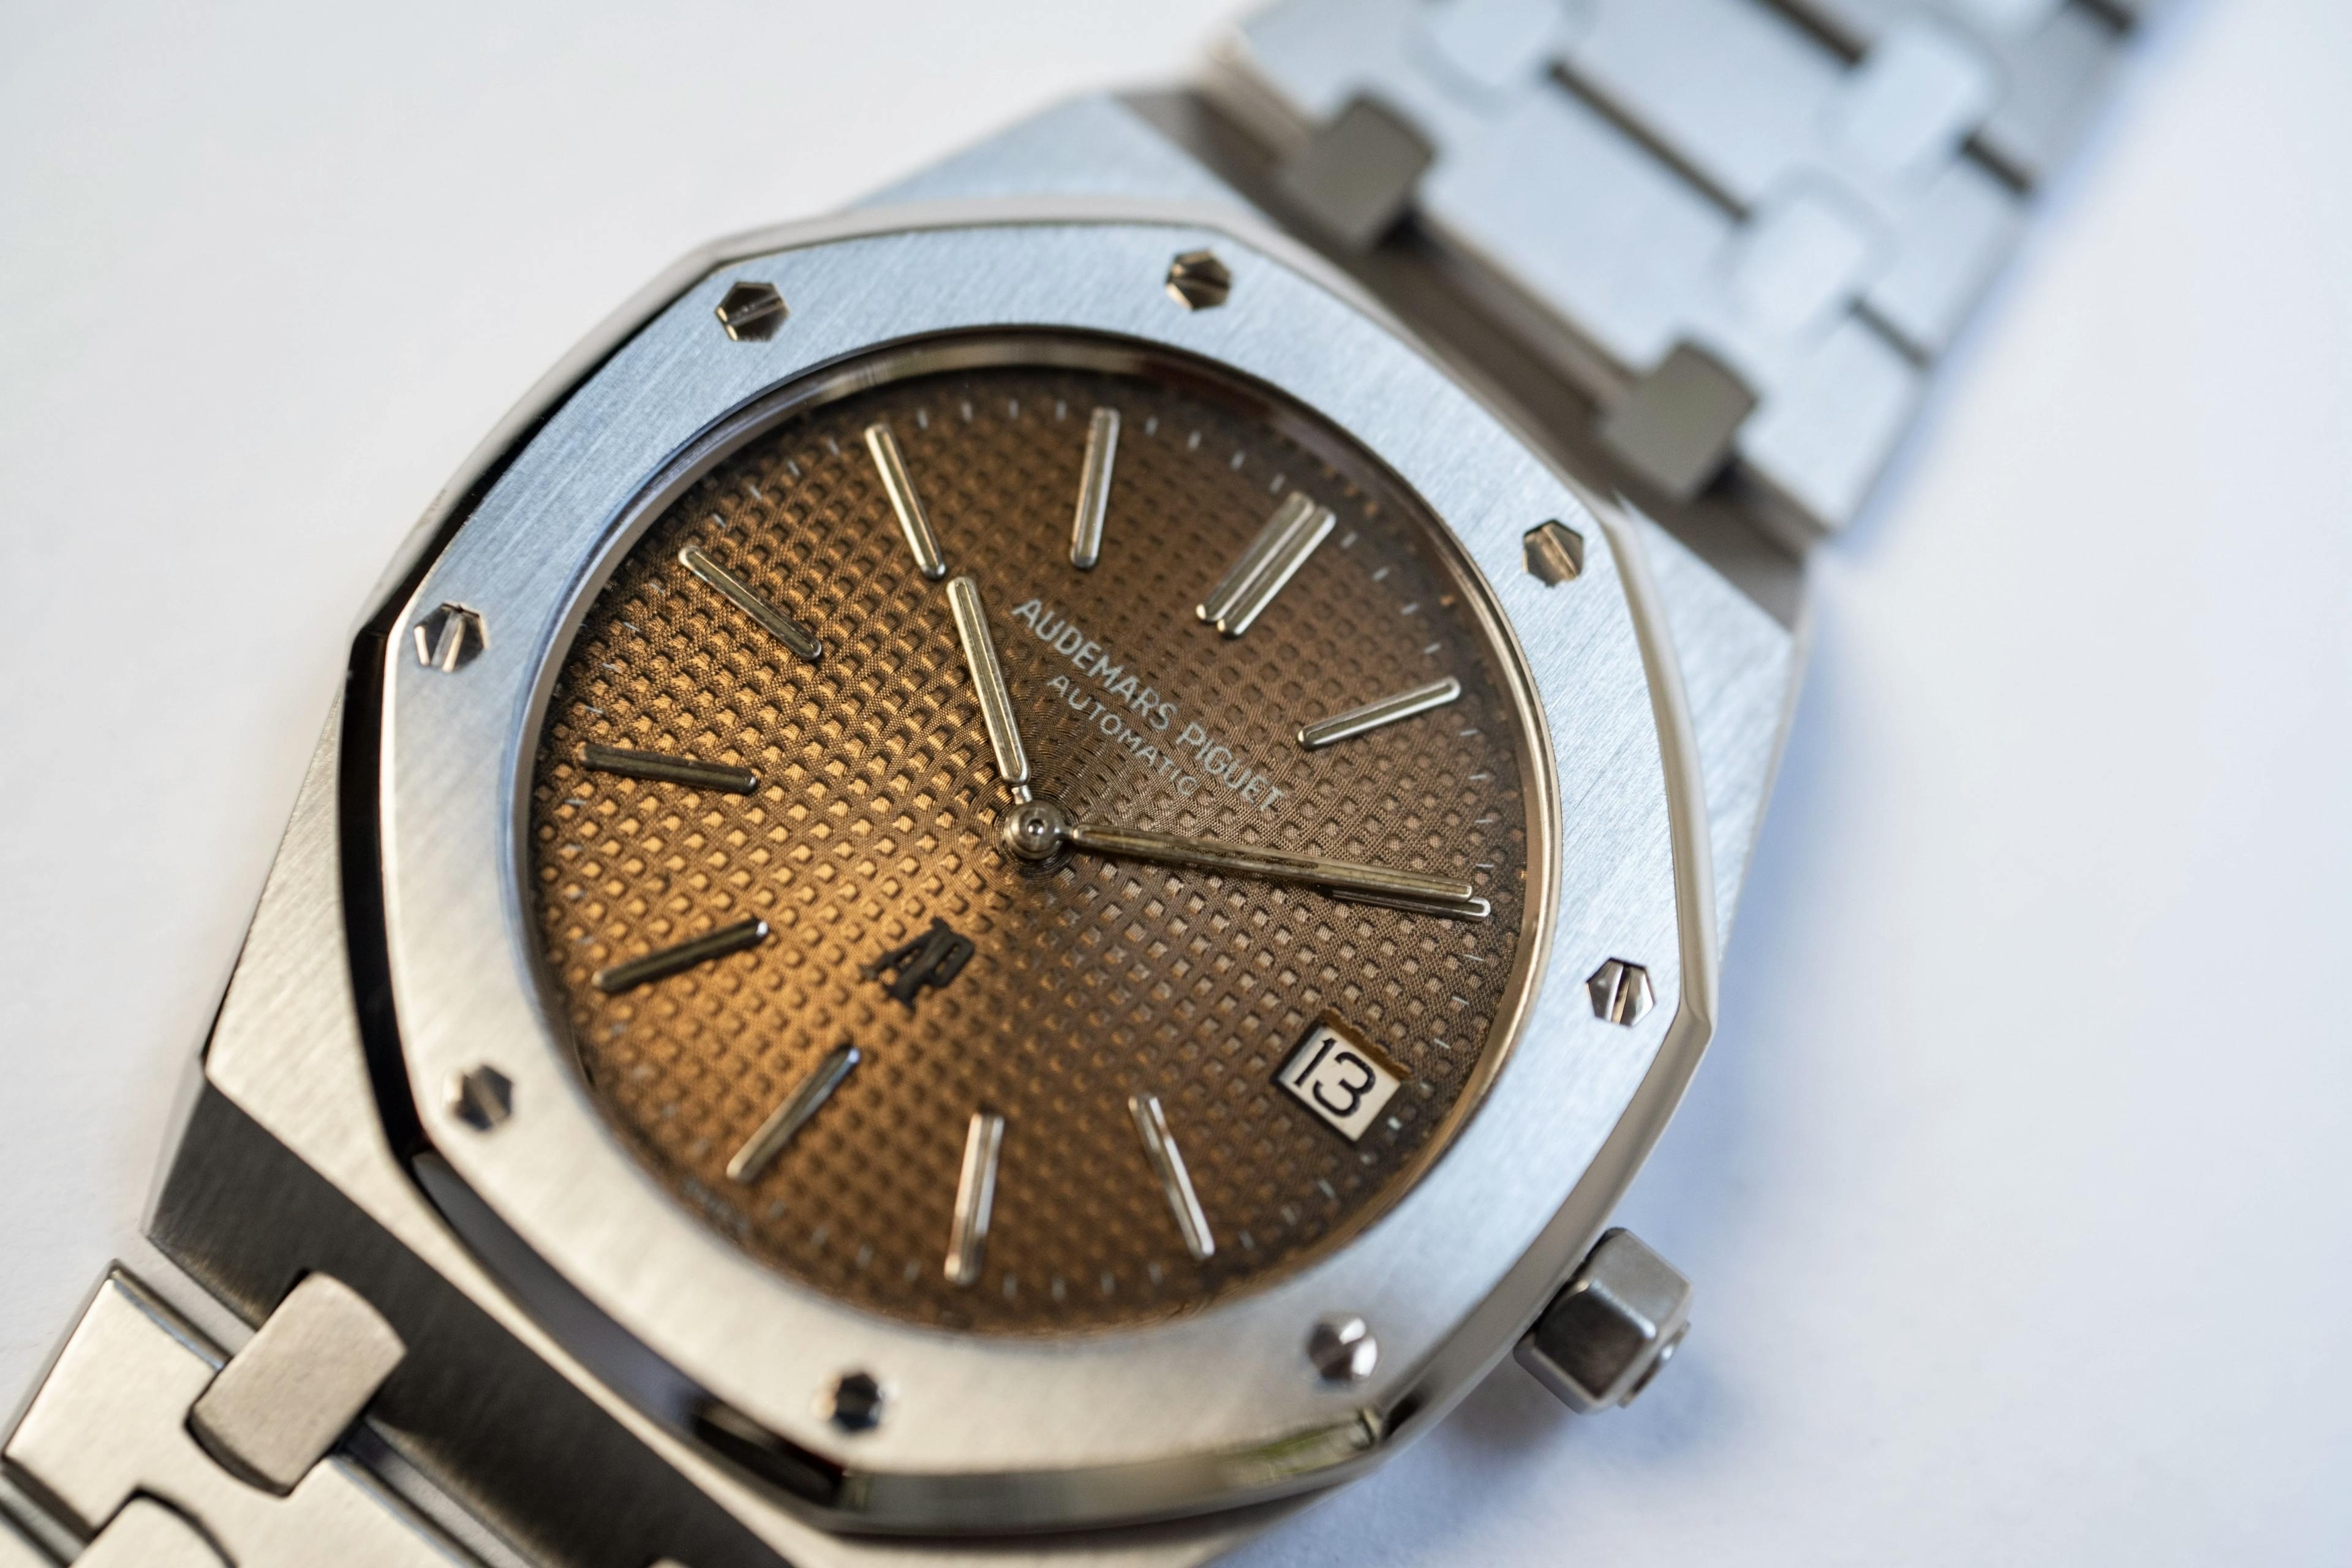 Few exceptional collectible watches